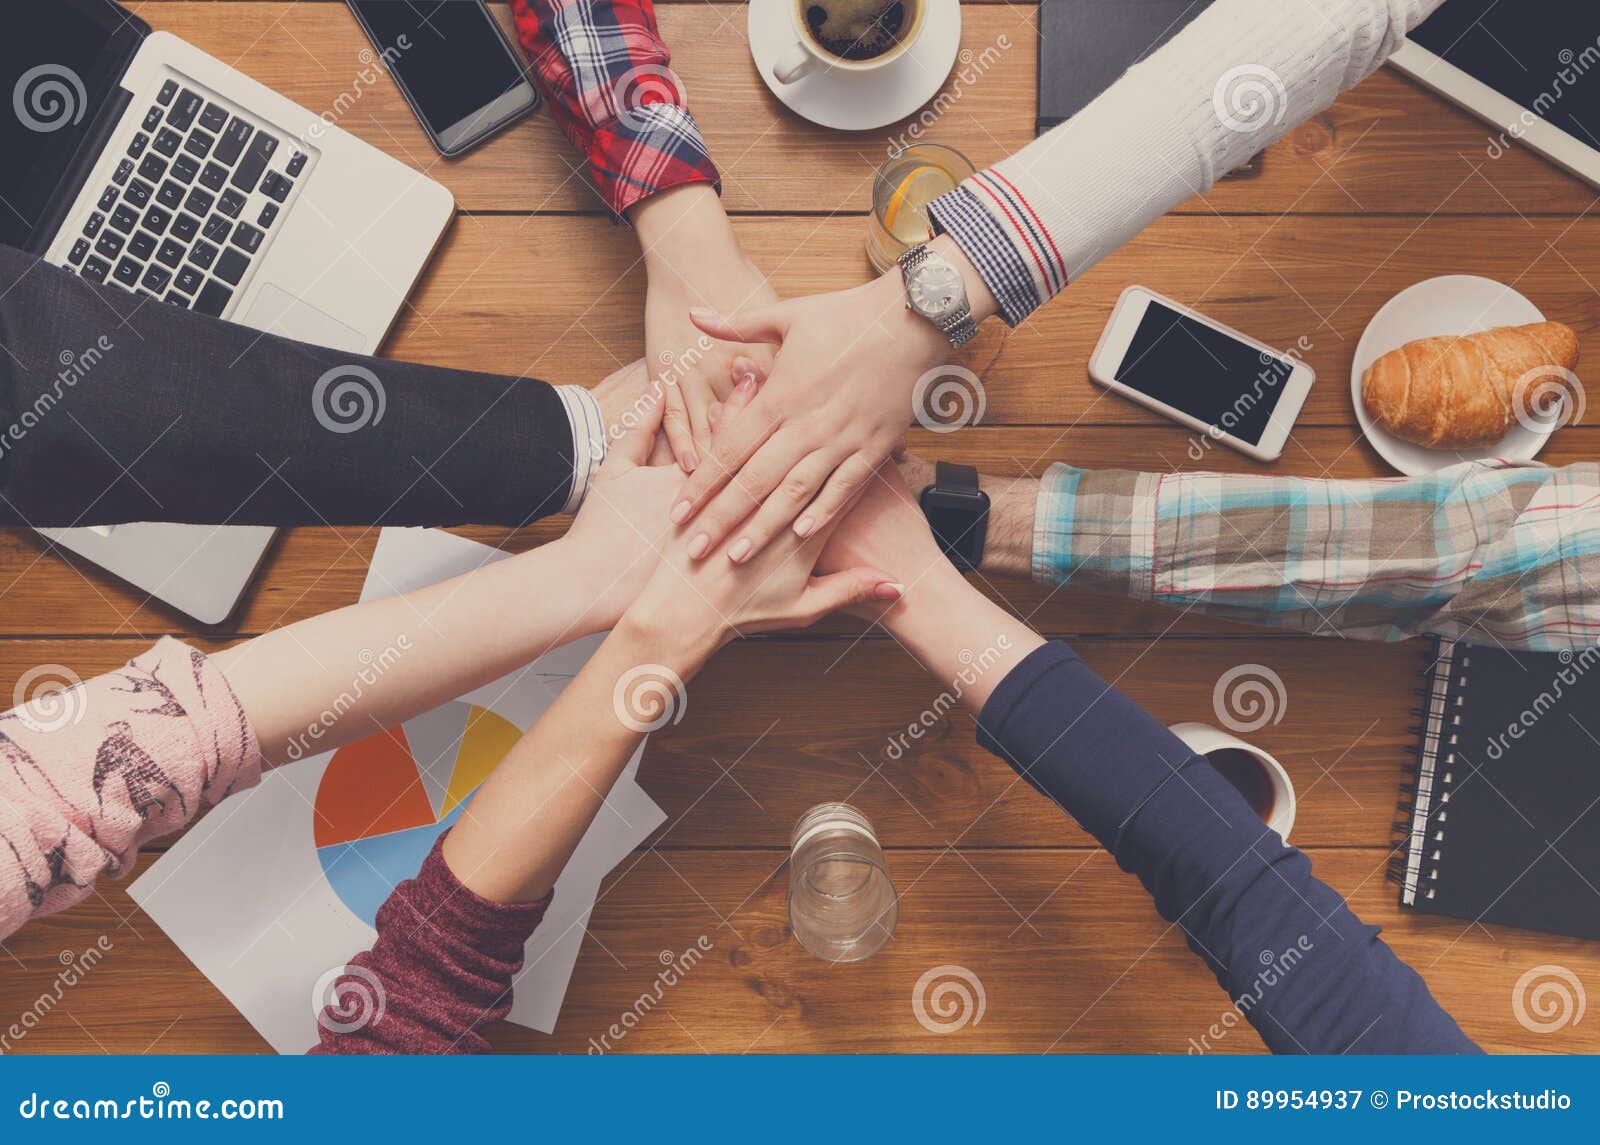 teamwork and teambuilding concept in office, people connect hands